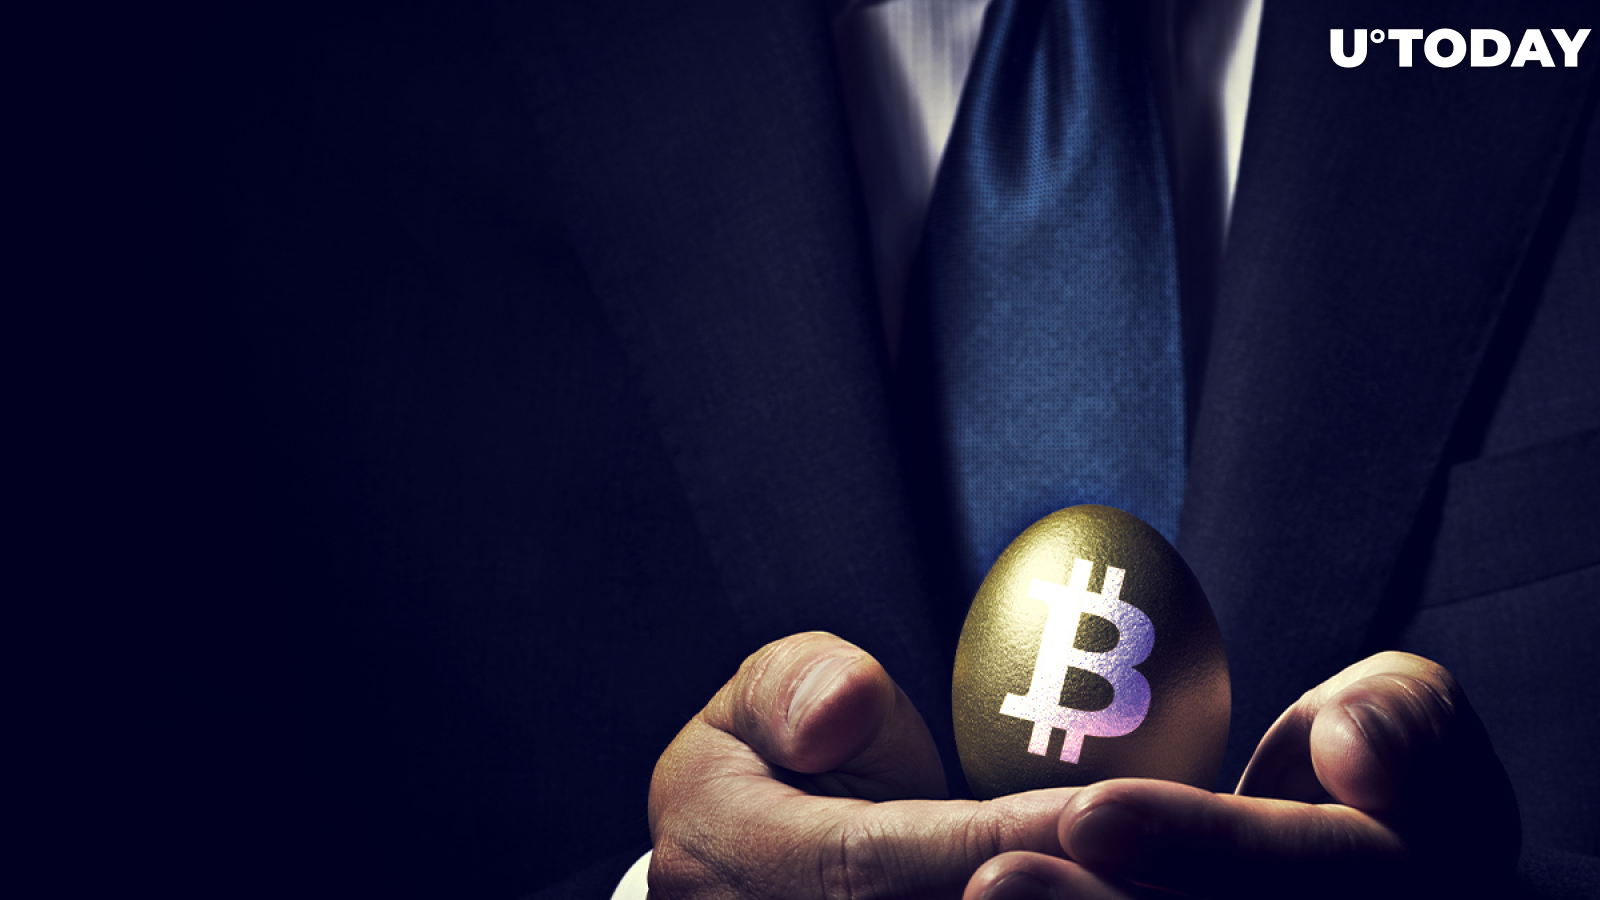 Satoshi Becomes 33rd Richest Person in the World on Bitcoin's 12th Birthday